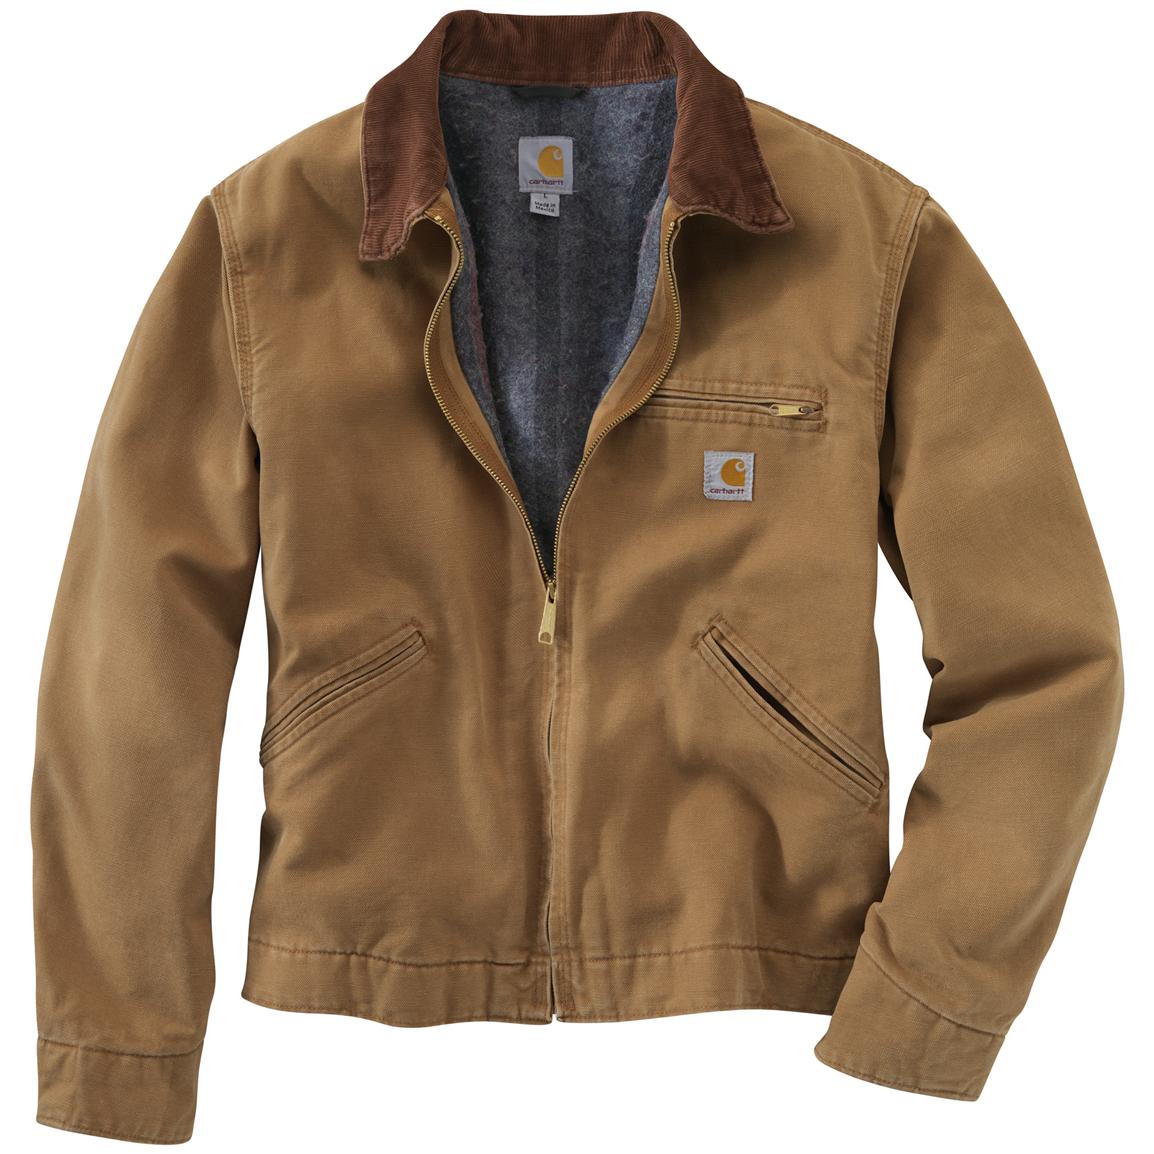 The search for Cooper’s jacket – Quantifiable Connection